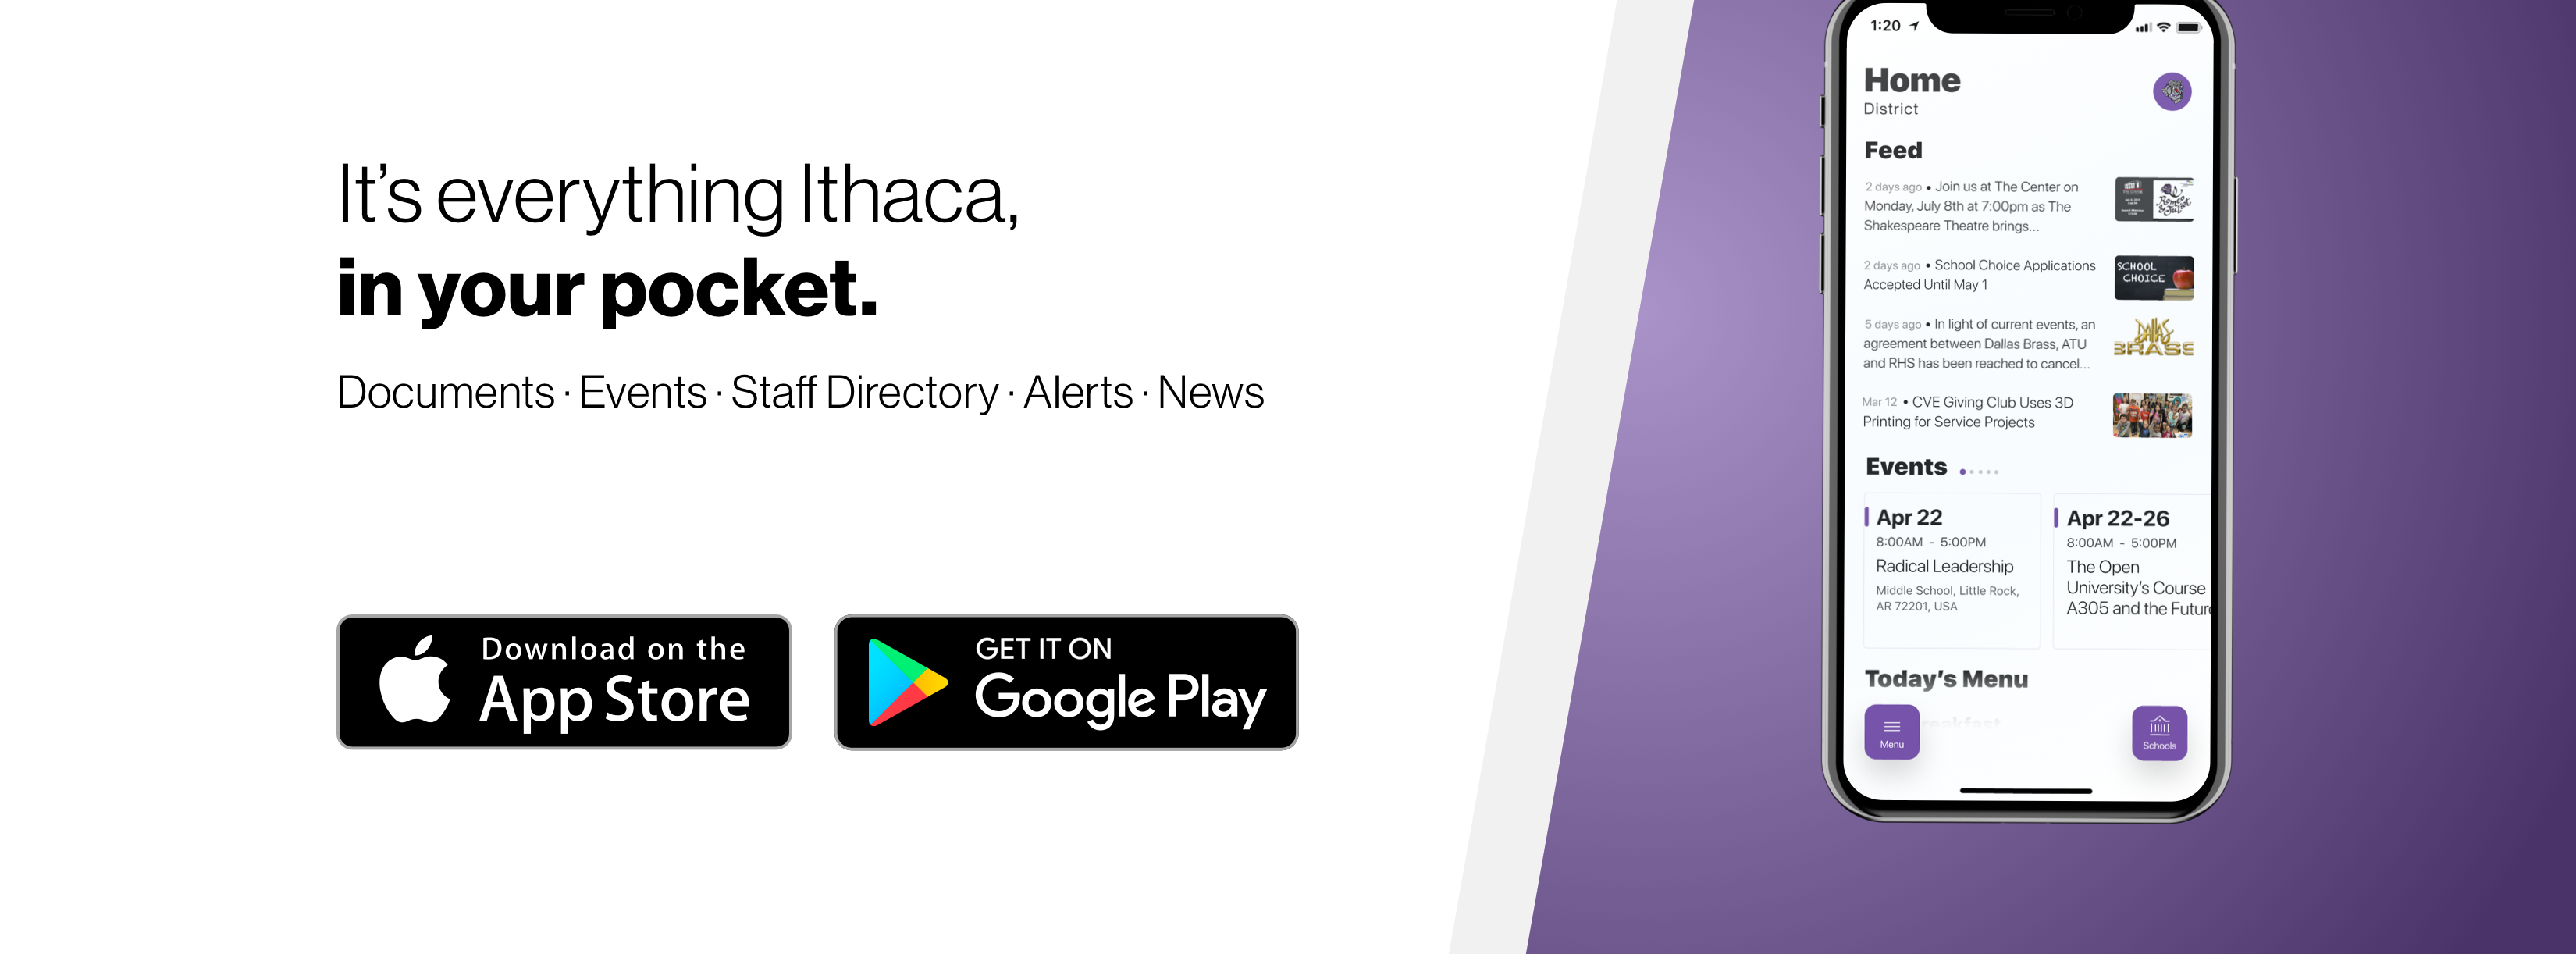 It's everything Ithaca, in your pocket. Download in the App Store and Google Play.